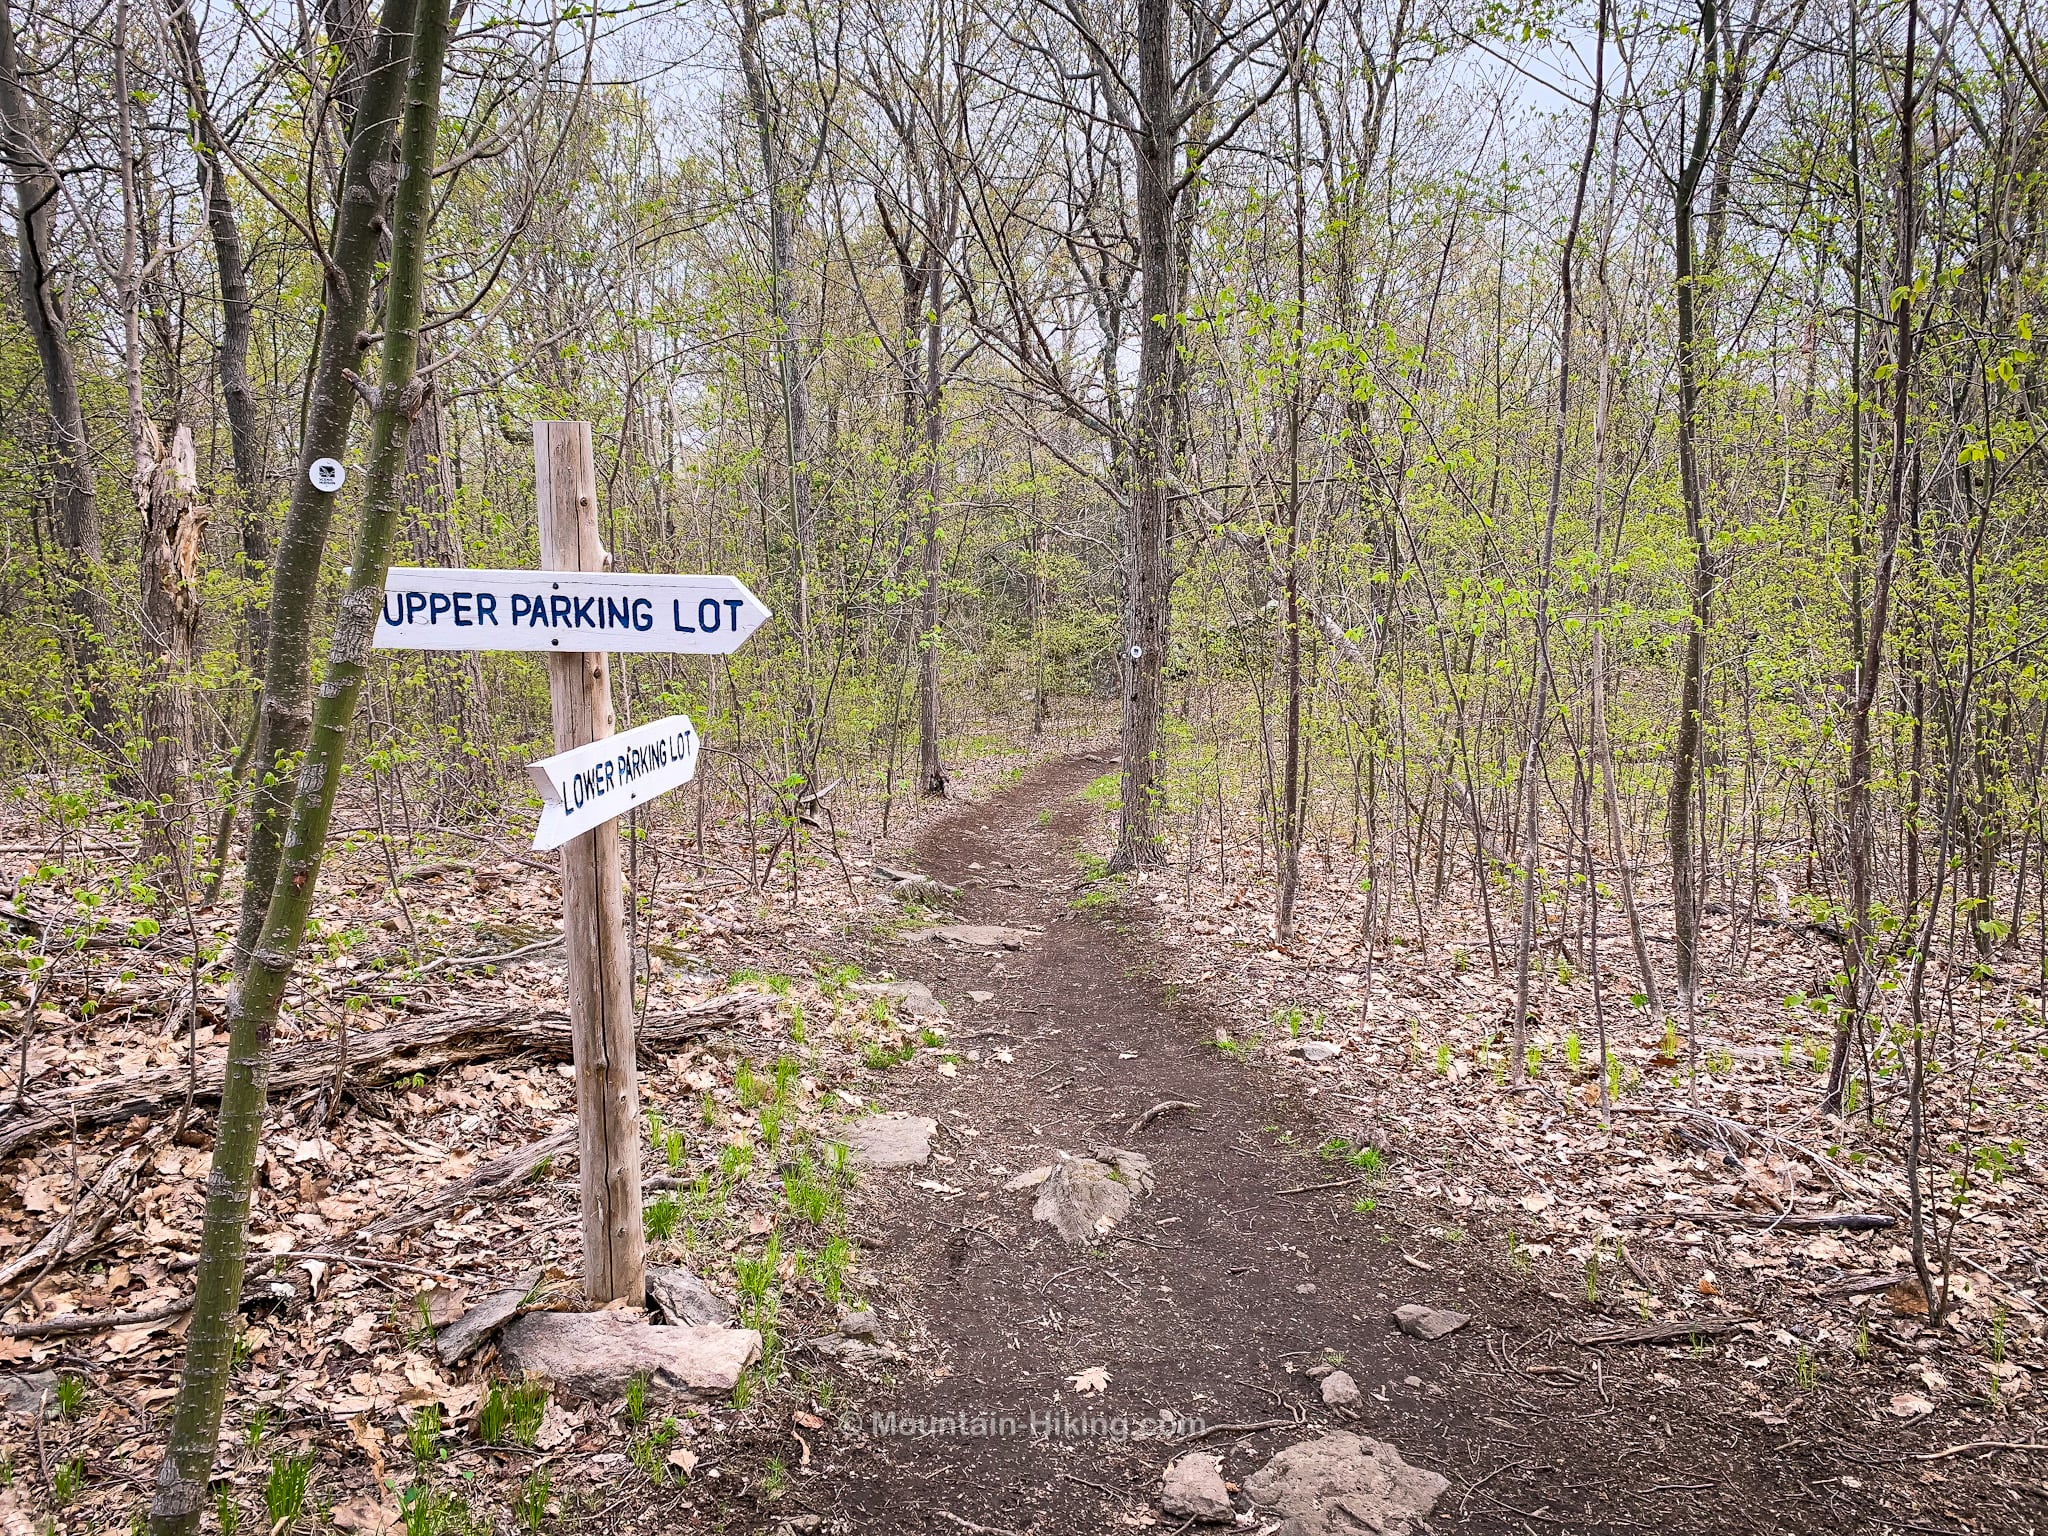 trail sign posts